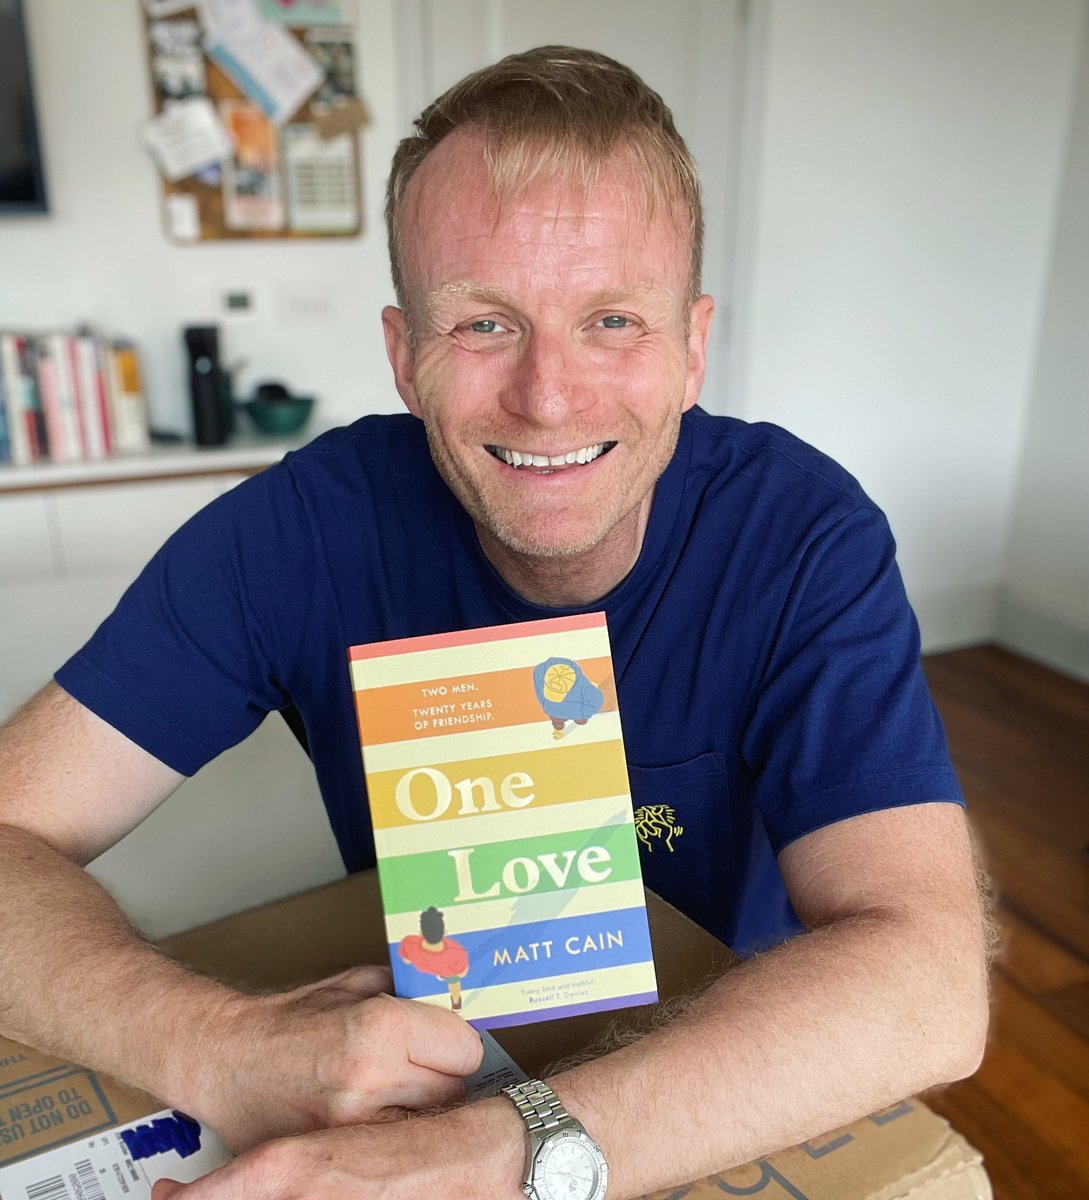 ONE LOVE is out in paperback on 30 May! It’s the story of a 20 year friendship, blurred boundaries and a love that may or may not be unrequited - all coming to a head at @ManchesterPride. And I’m going to sign every copy pre-ordered from @QueerLitUK! ❤️

queerlit.co.uk/products/one-l…